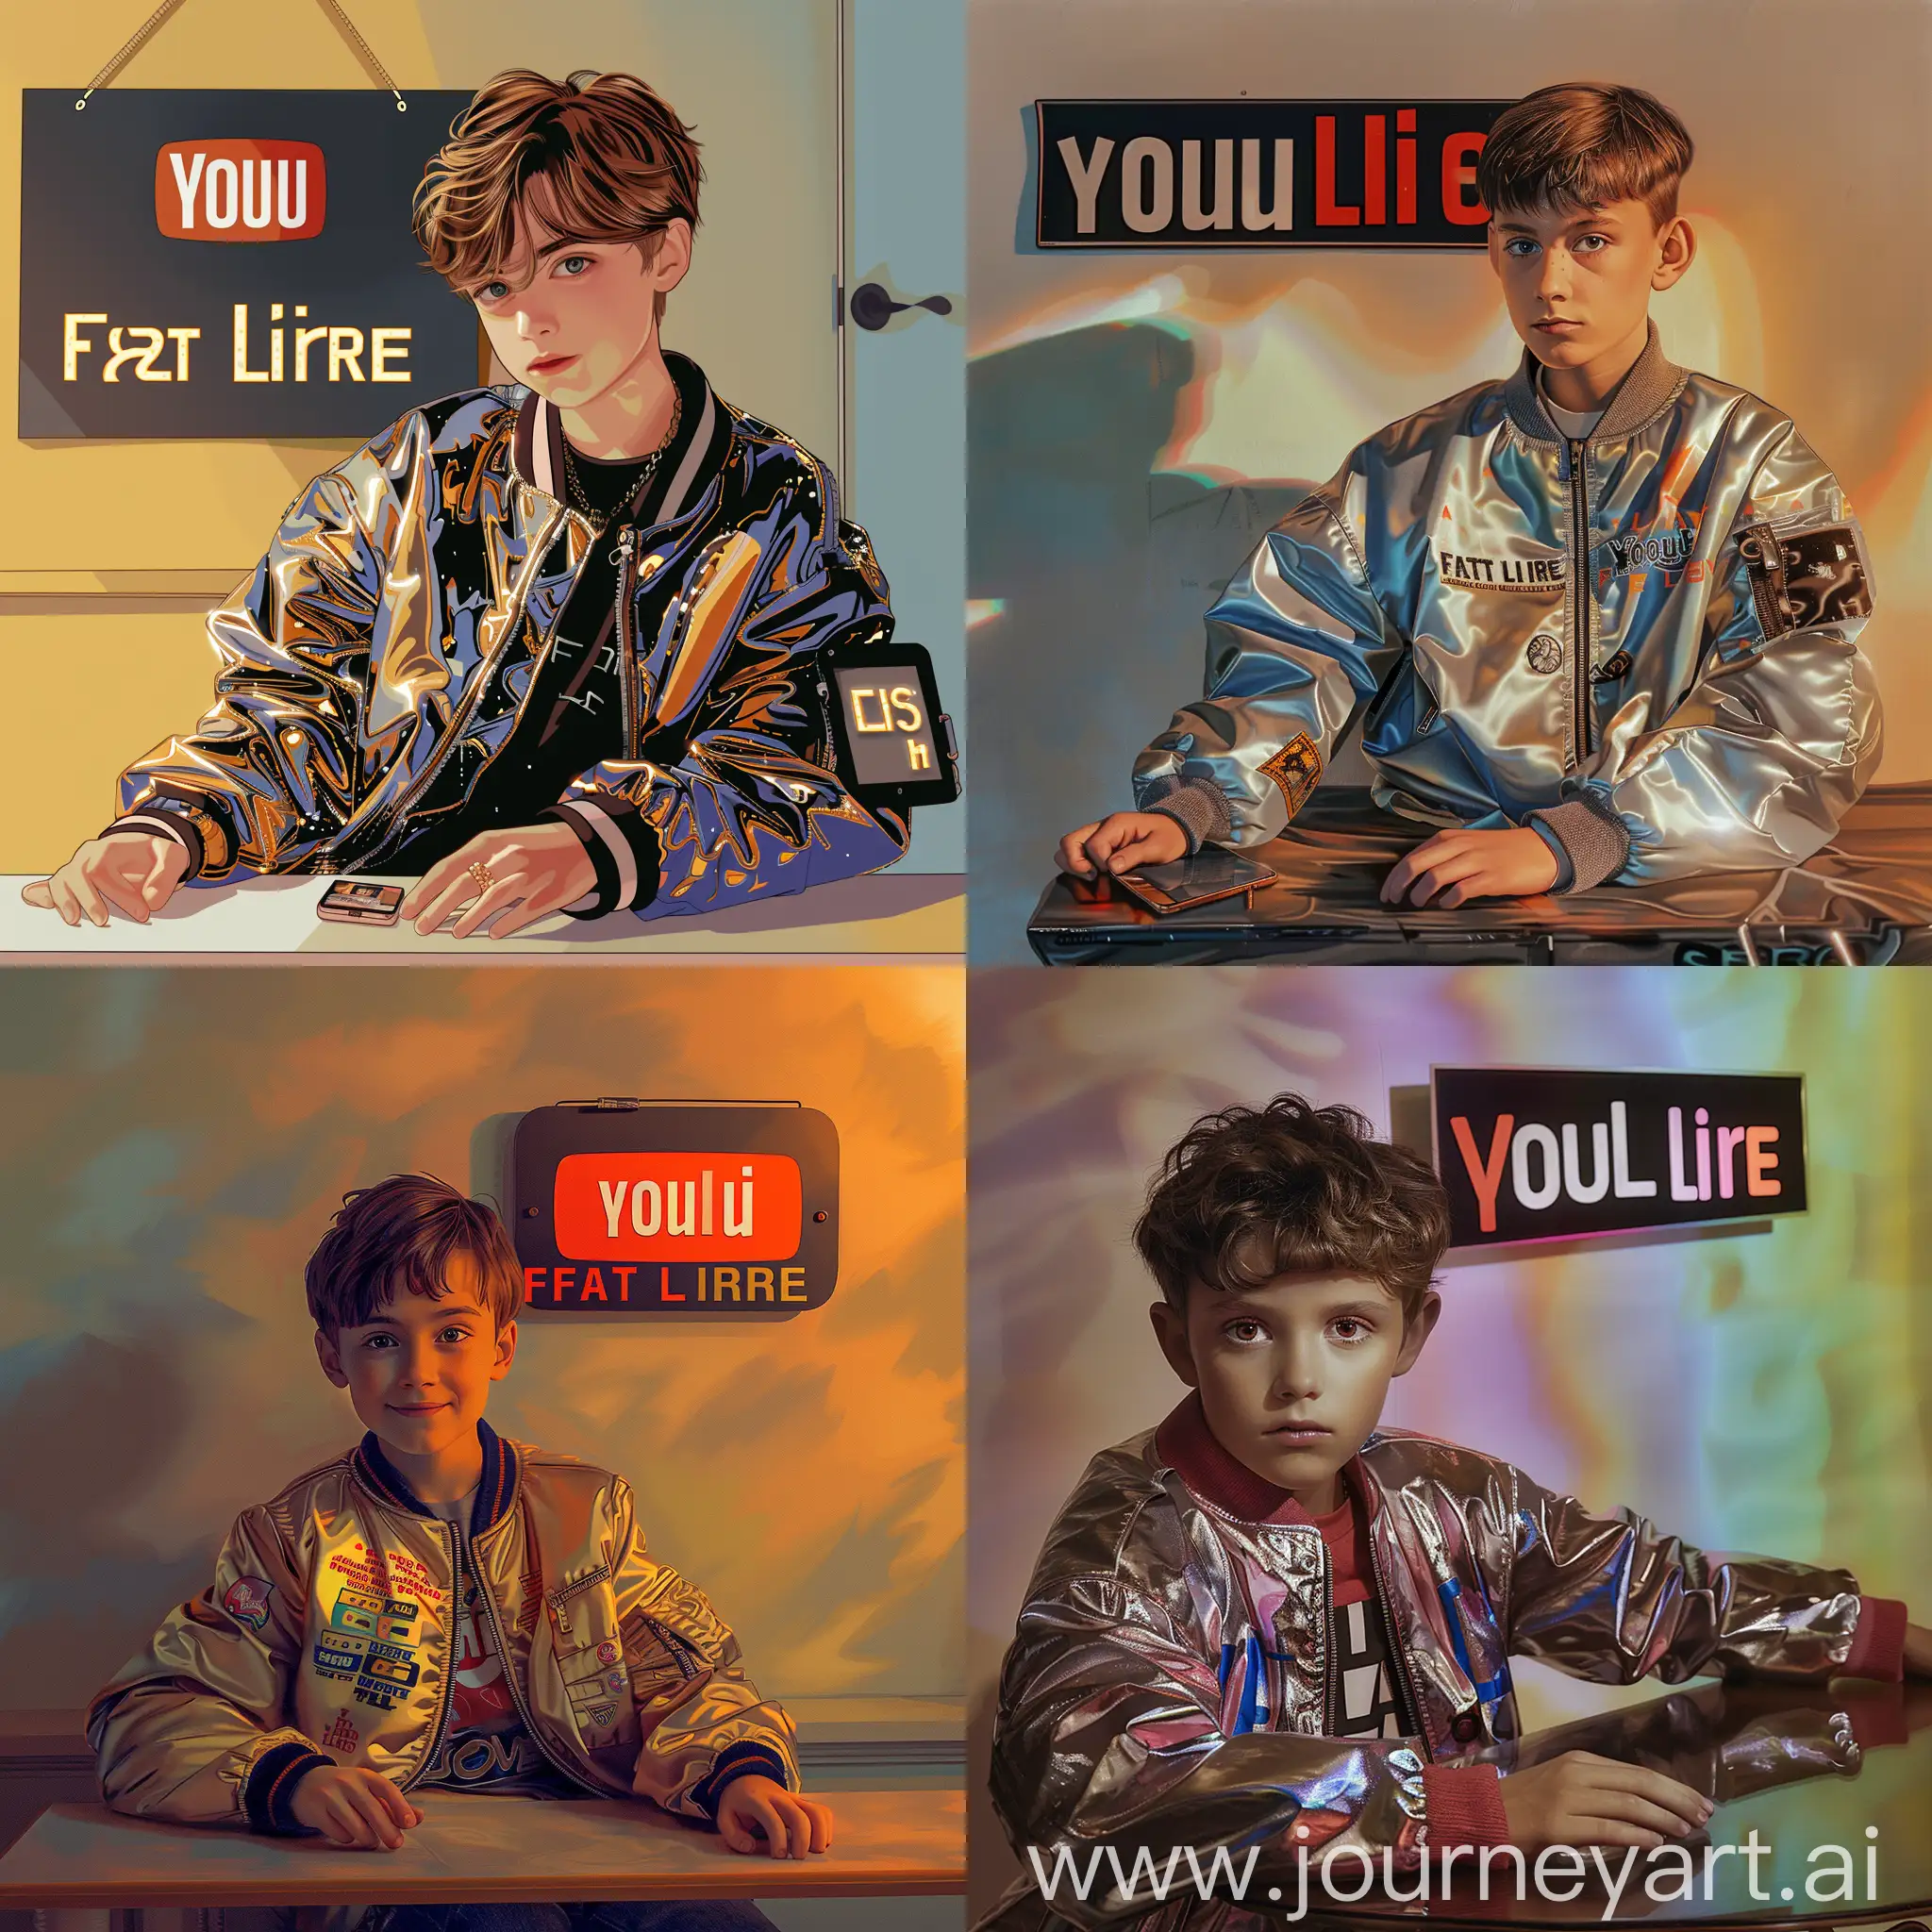 gradiant background and a "youtube" board hang on wall and a smart boy sitting and wear beautiful jacket , "Fact L i r e" Is written on jacket and boy keep hand on beautuful table